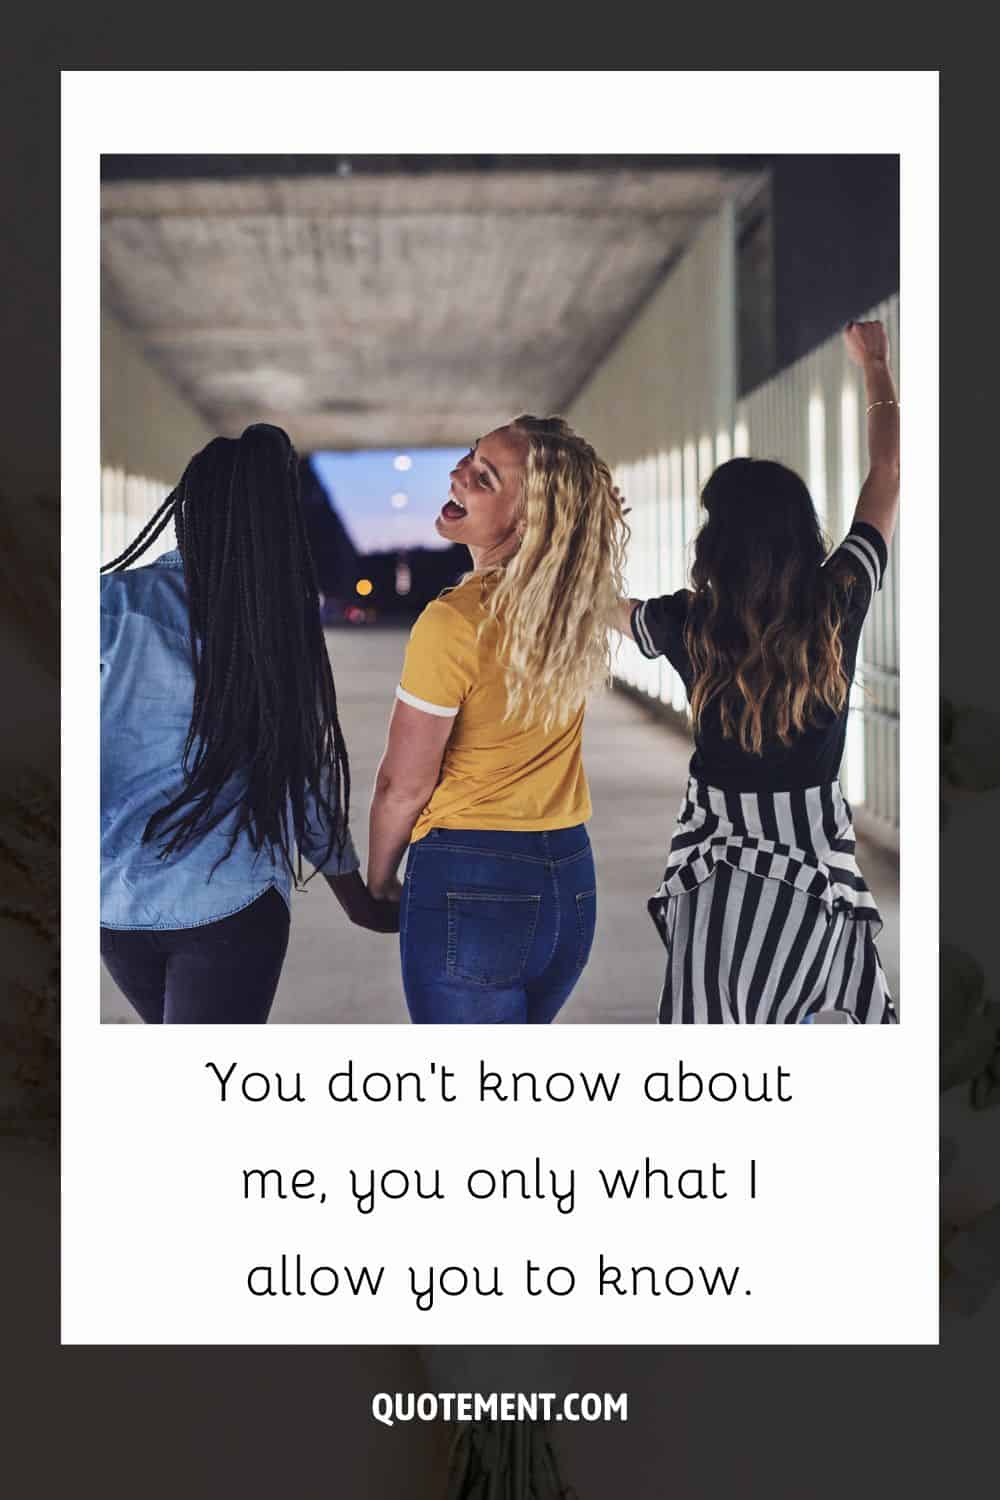 Image of three playful girls holding hands representing a cool Instagram caption.
